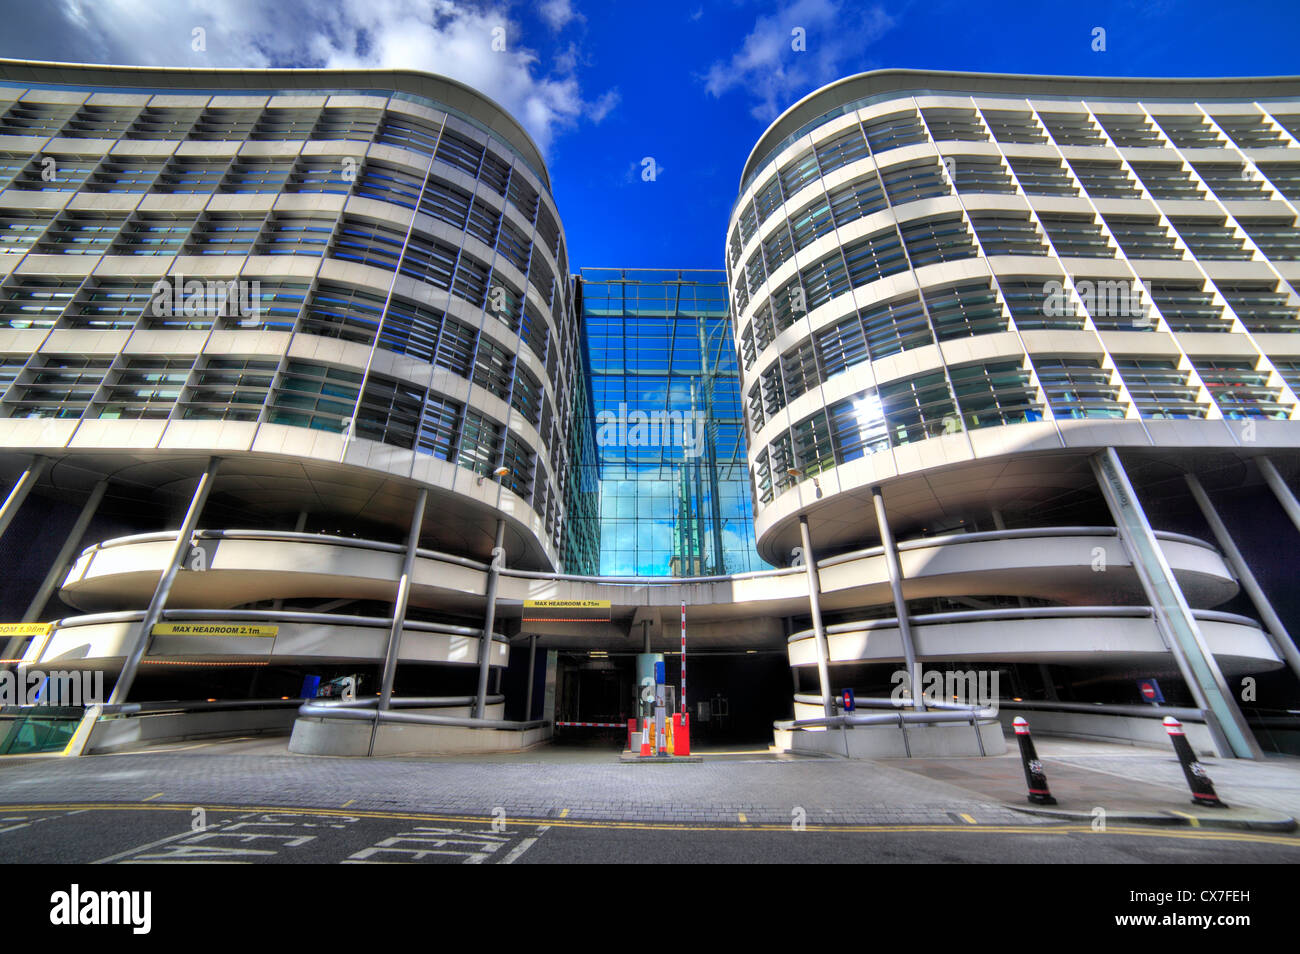 Tower place building and parking garage, London, UK Stock Photo